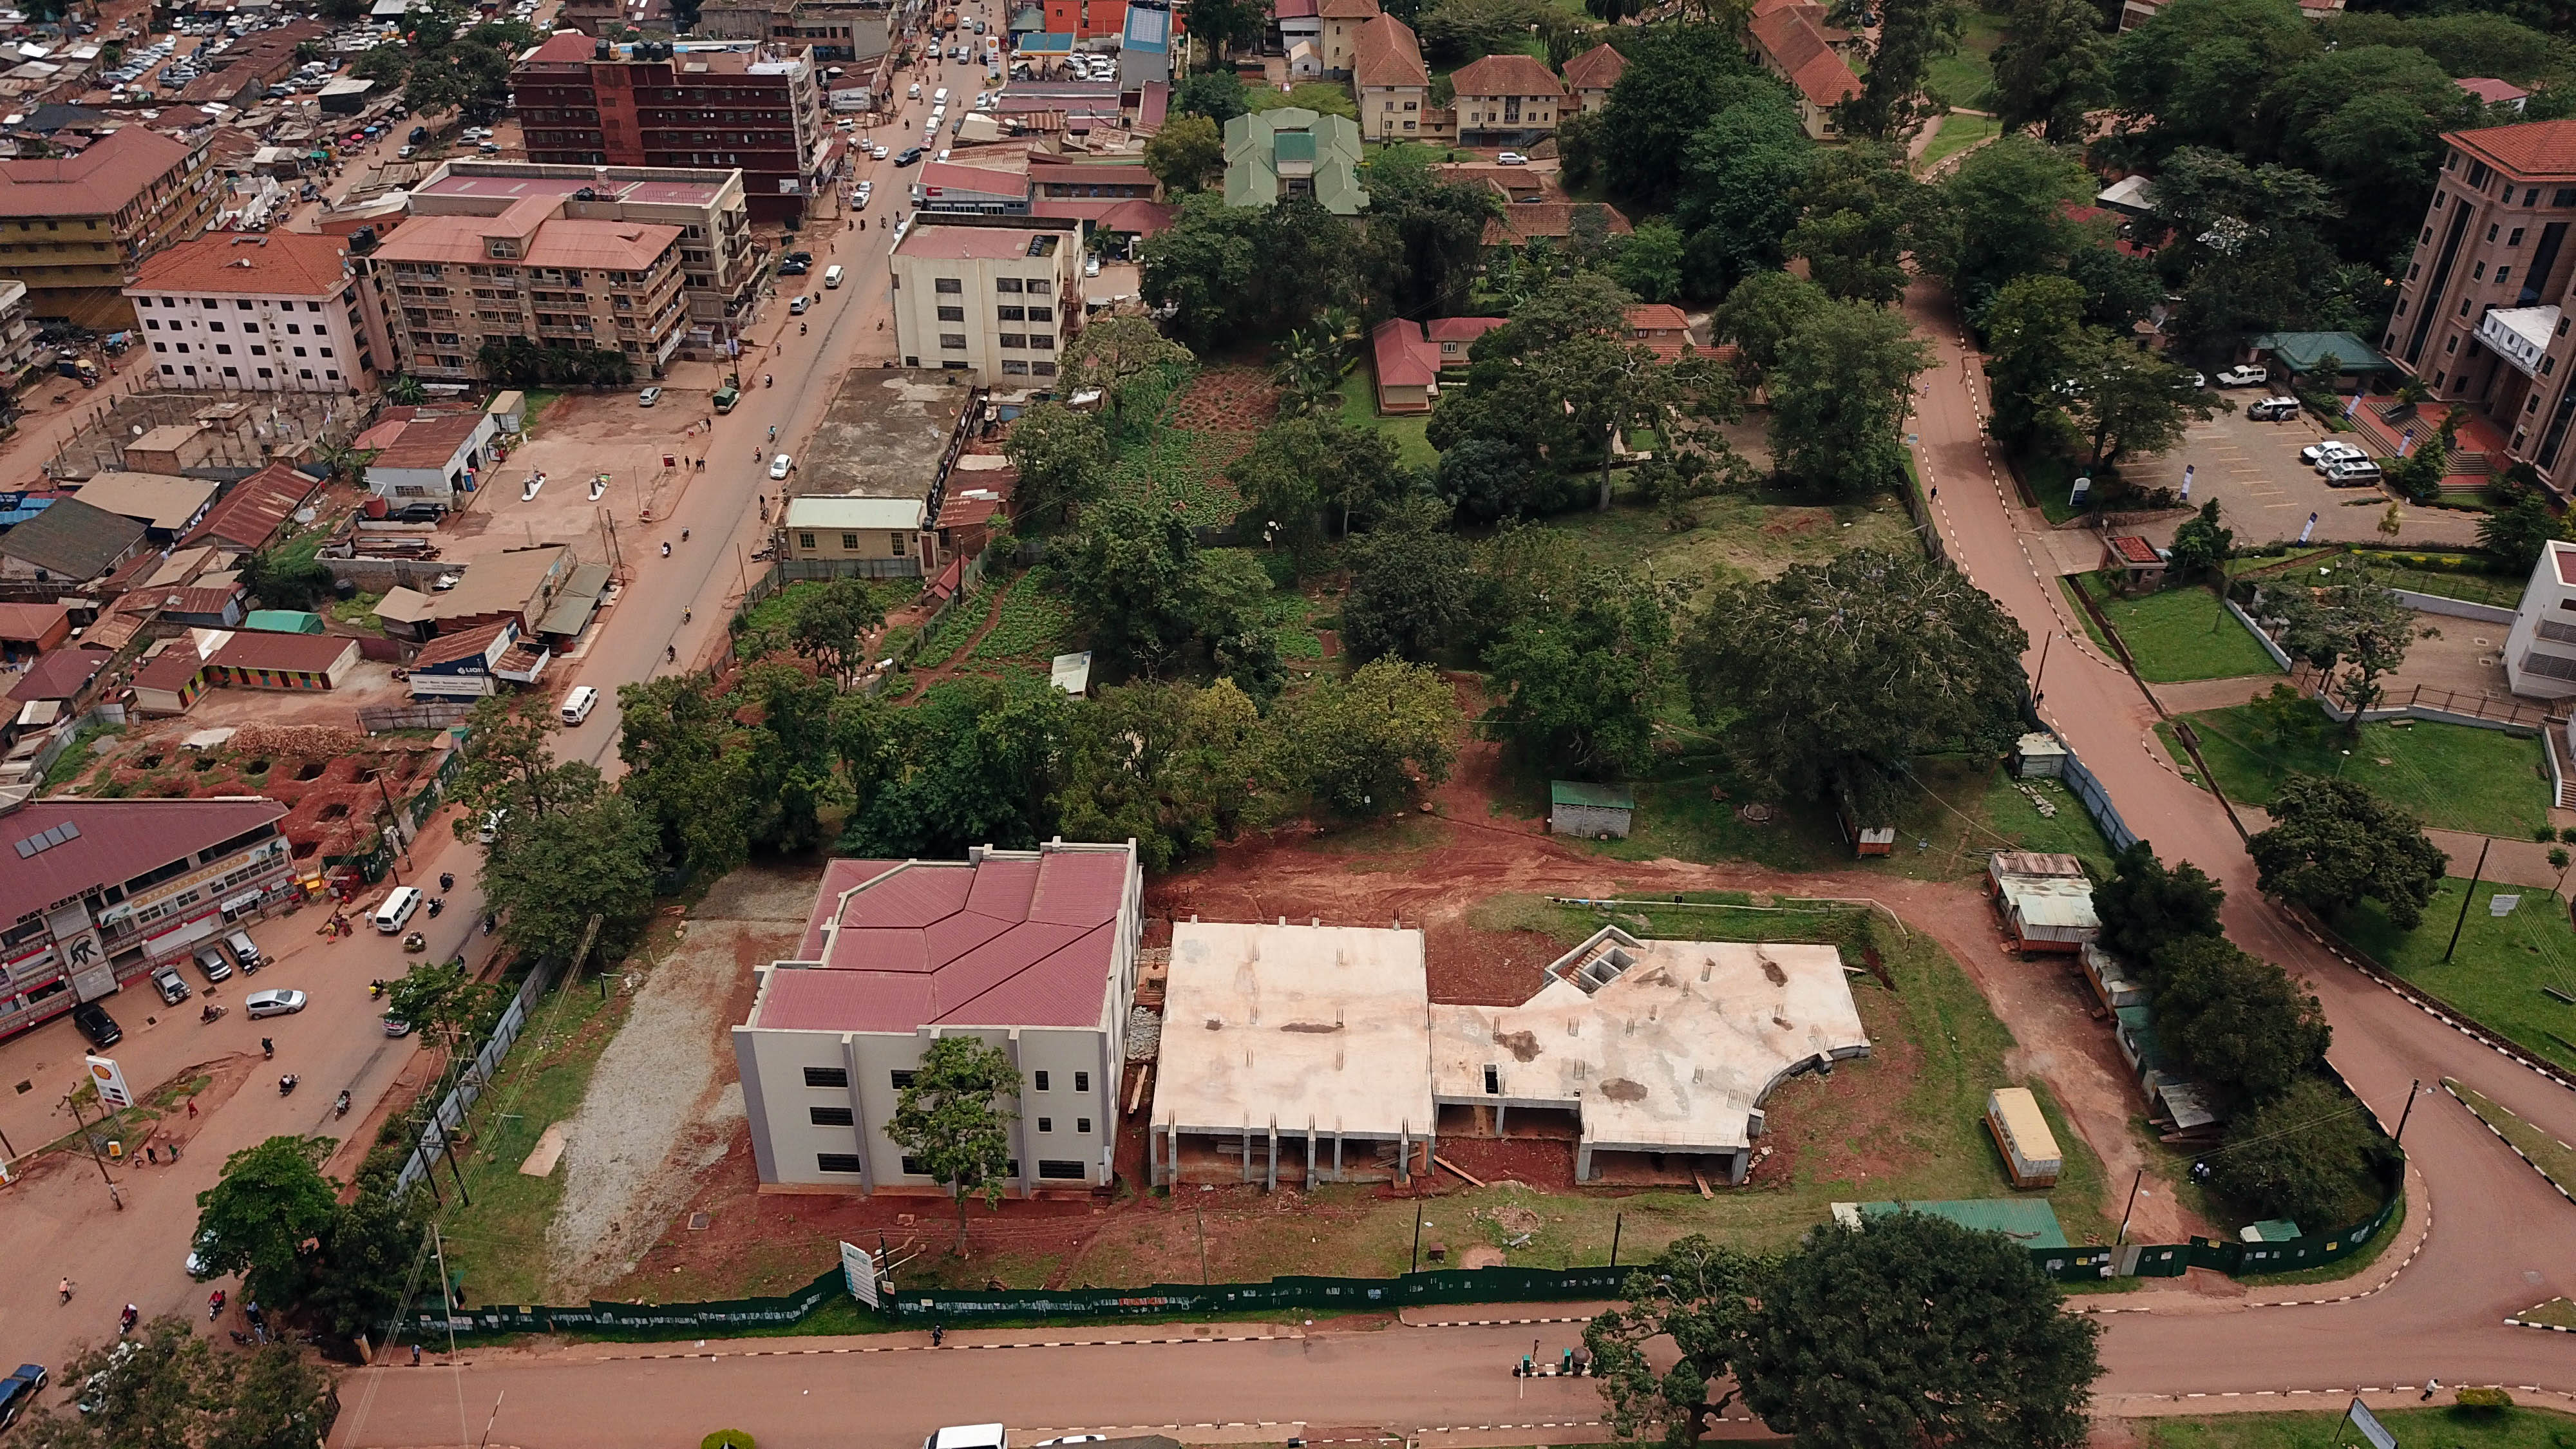 Makerere University School of Public Health Receives USD $100,000 donation from The Rockefeller Foundation for new building